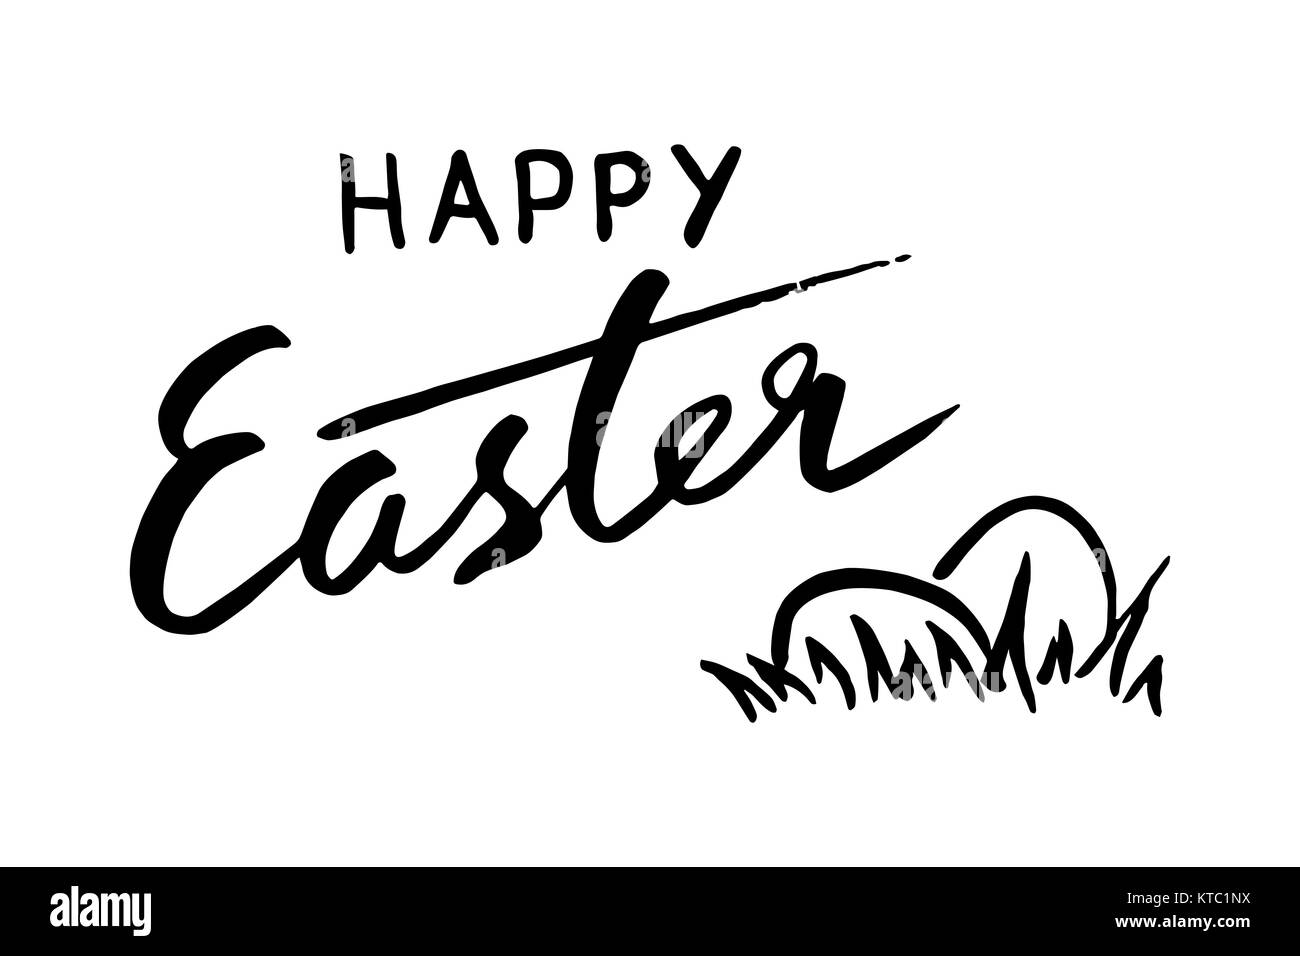 Happy Easter lettering and eggs for greeting card. Vector vintage letterpress Stock Photo